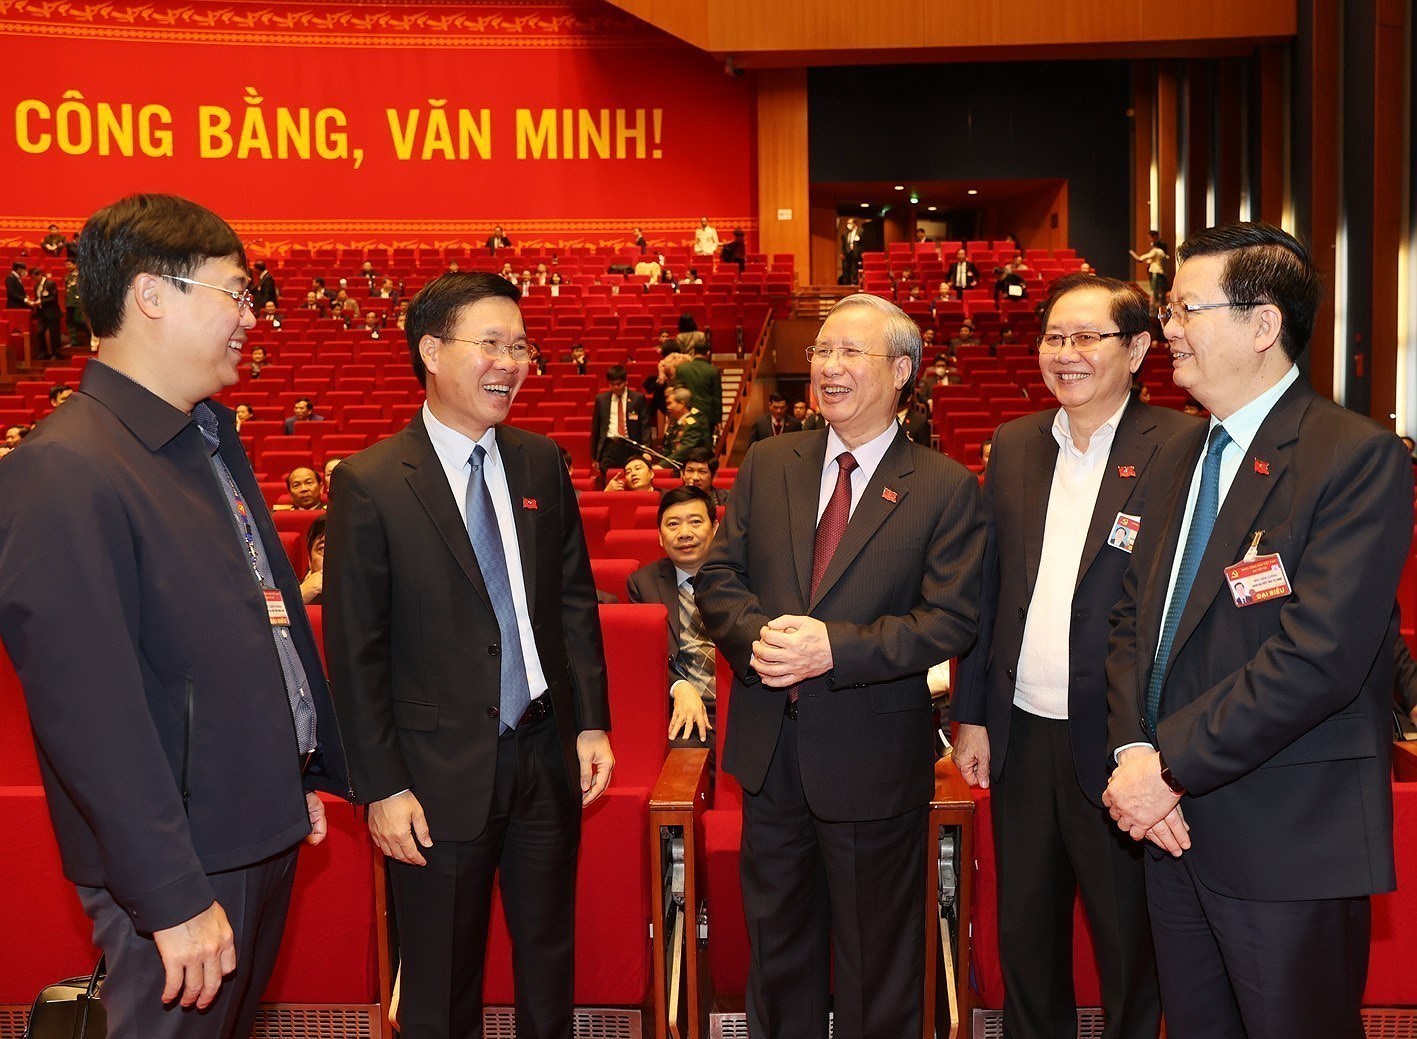 Top leaders attend the Congress's discussion on January 28 hinh anh 1